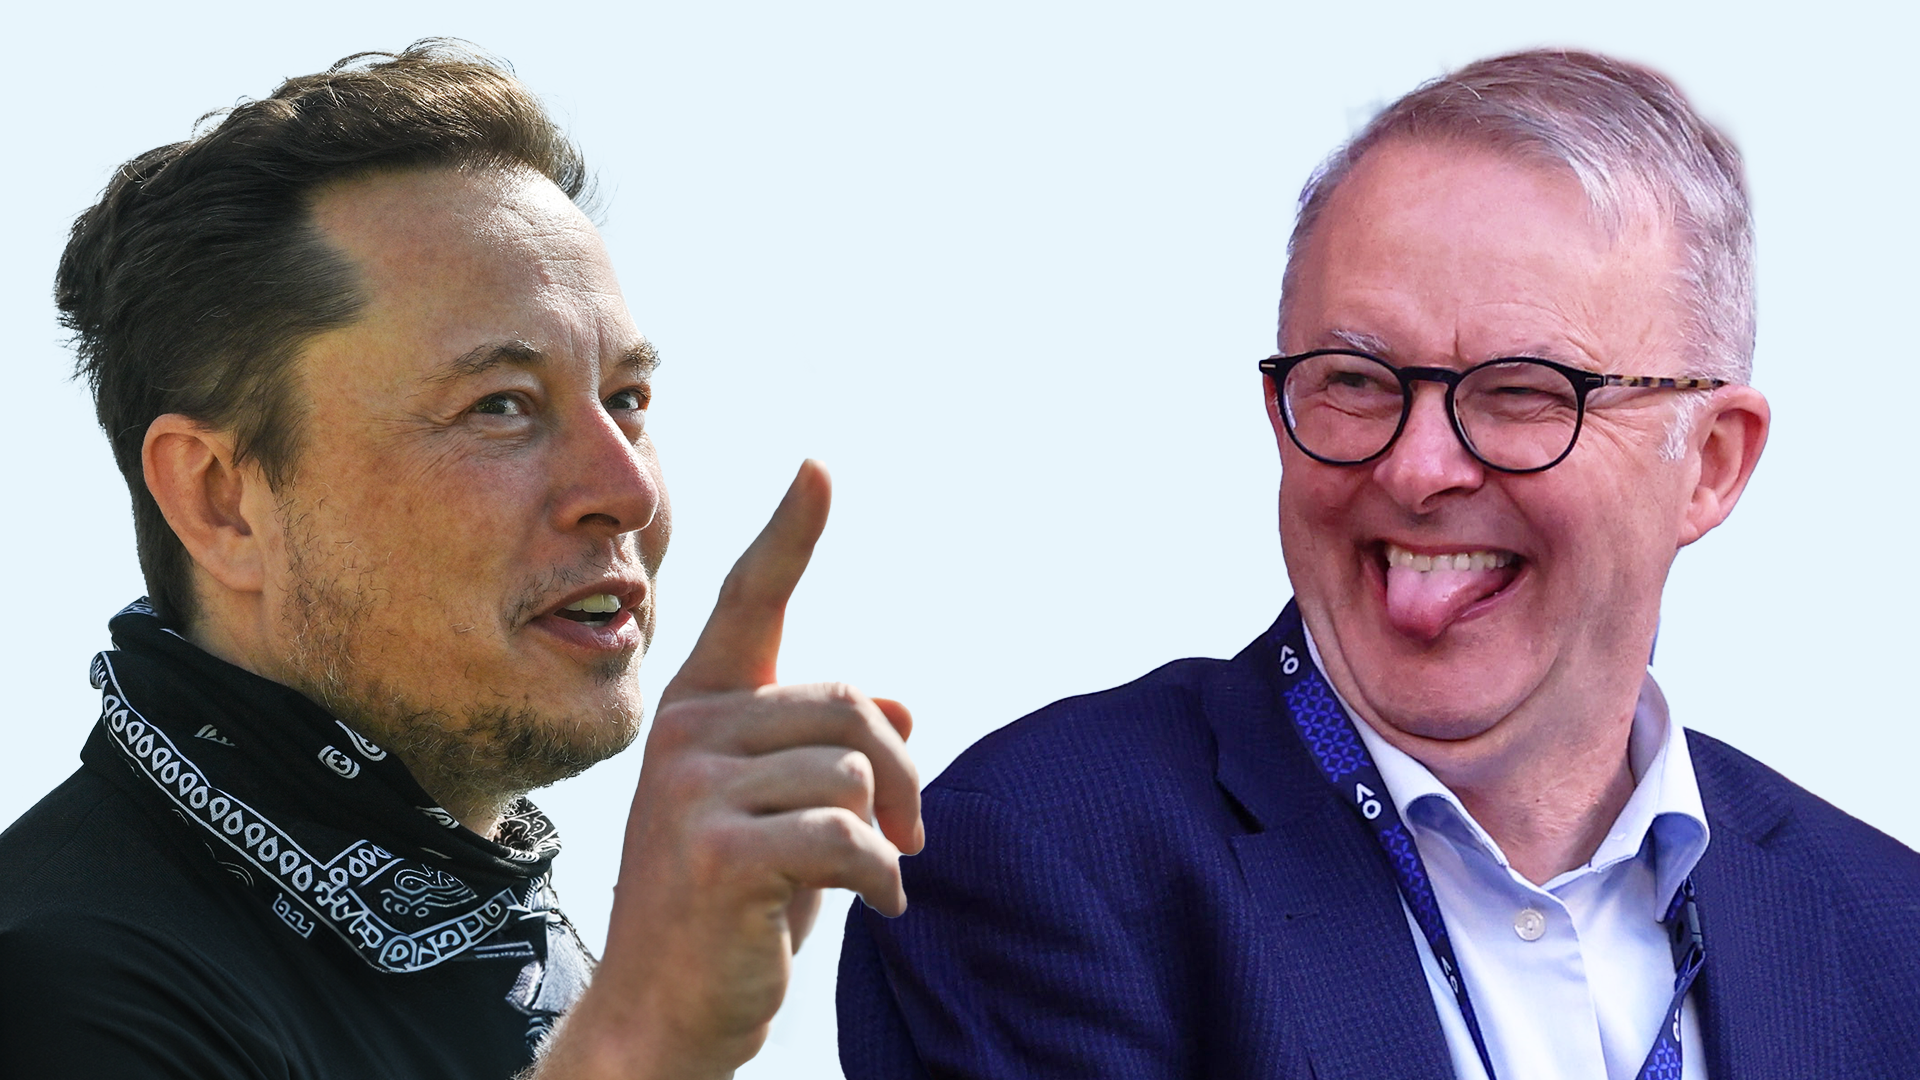 Elon Musk or Albanese. Who do you trust more?